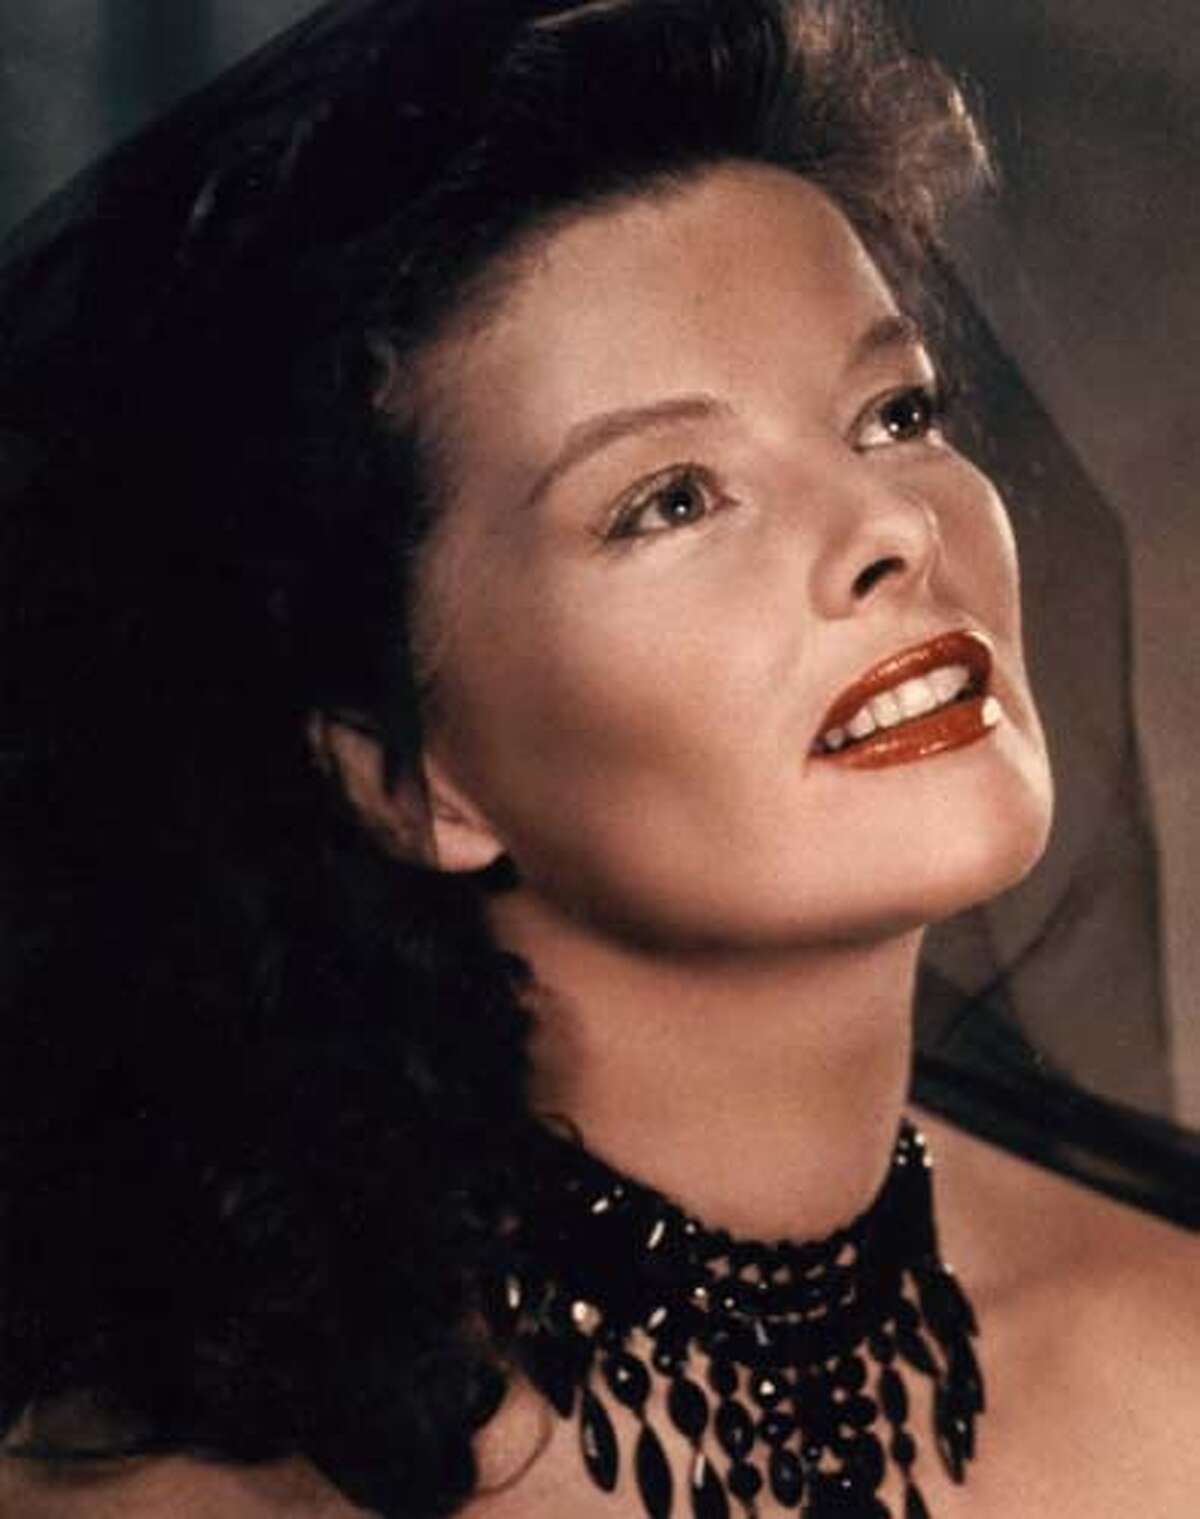 Katharine Hepburn - Hartford This 1940 file photo shows US actress Katharine Hepburn, who died Sunday, 29 June 2003, at the age of 96 surrounded by her family and friends at her home in Old Saybrook, Connecticut. A Hollywood icon, Hepburn's career spanned six decades during which she became one of the most-acclaimed actresses of all time, winning four Academy Awards. Head over to findagrave.com to see photos.